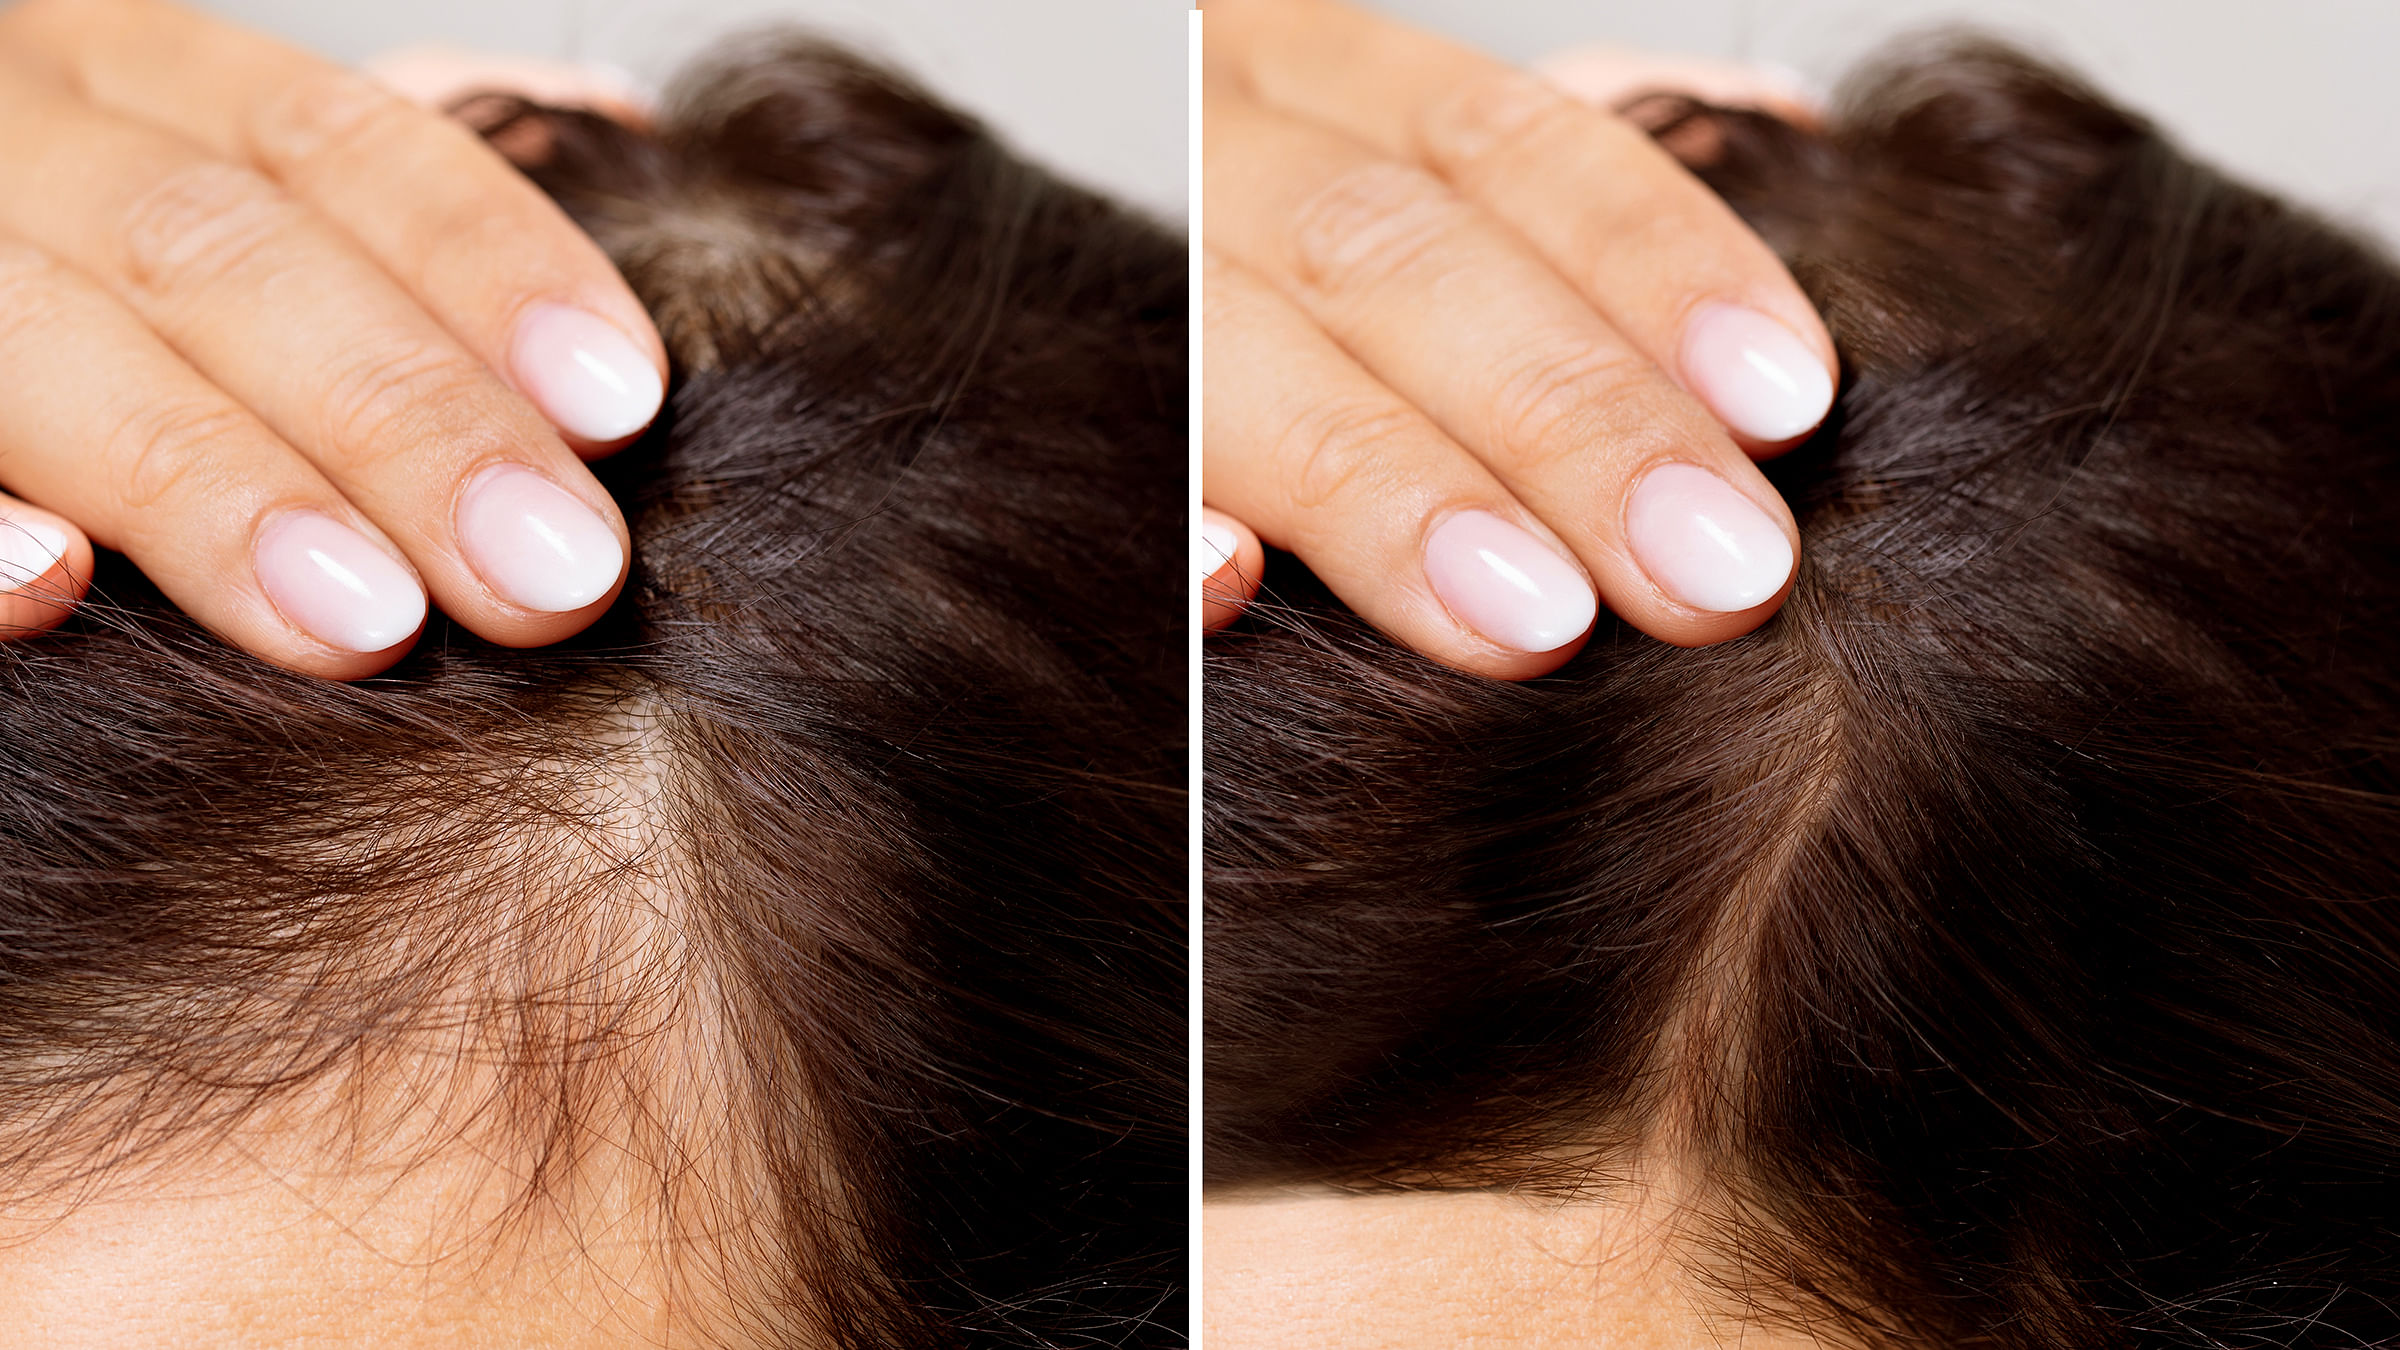 Top 5 home remedies that can help reduce hair loss | The Daily Star